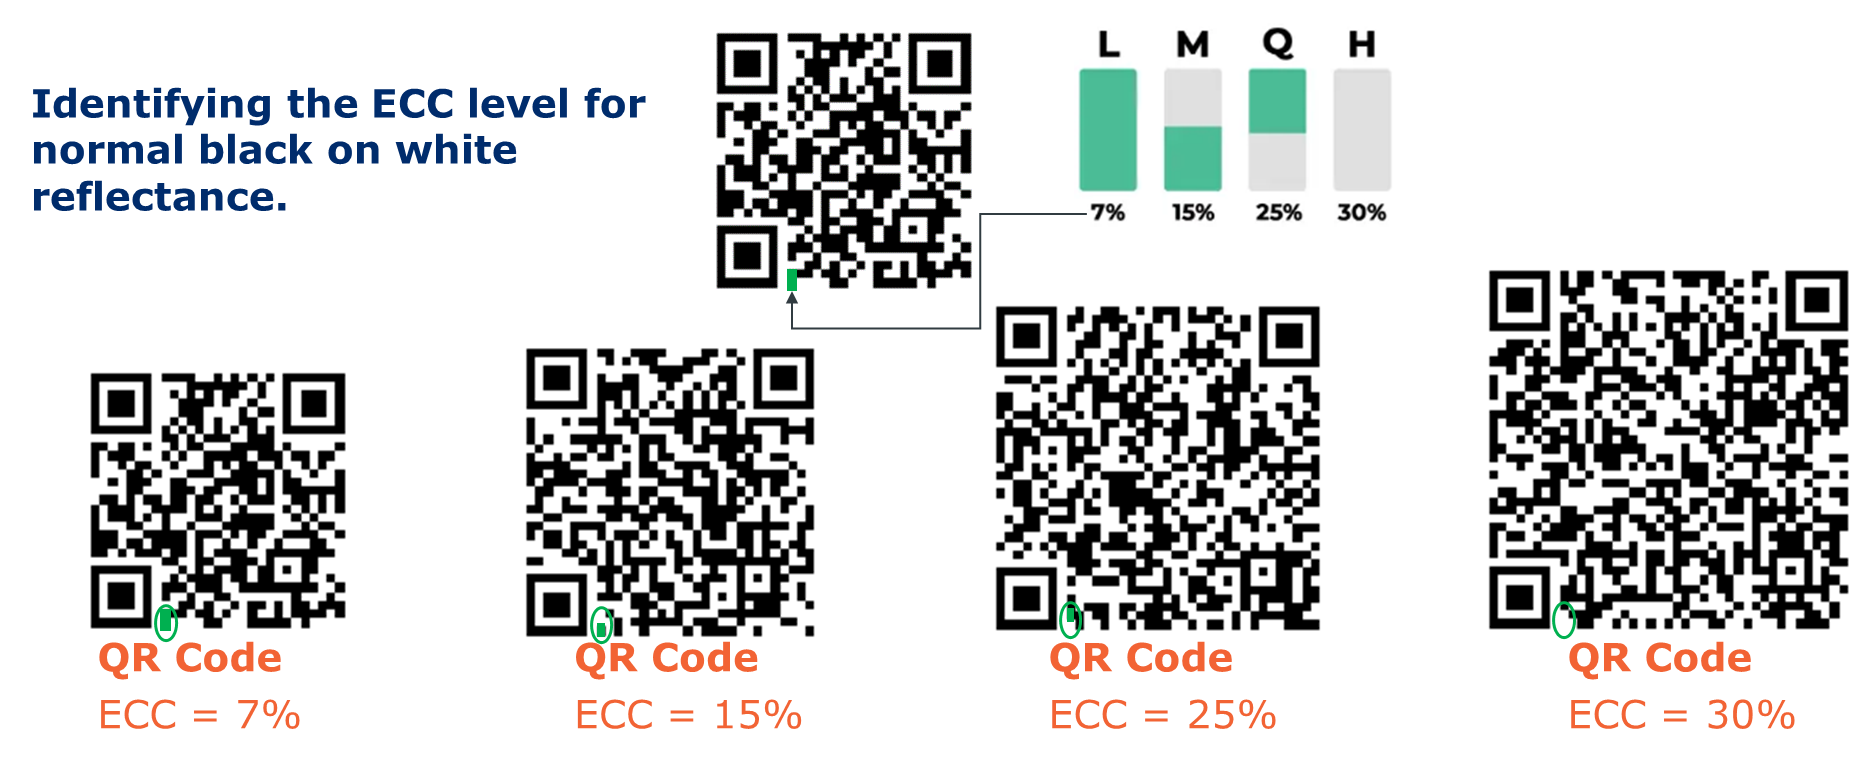 A complex diagram showing where the error correction is encoded in a QR Code